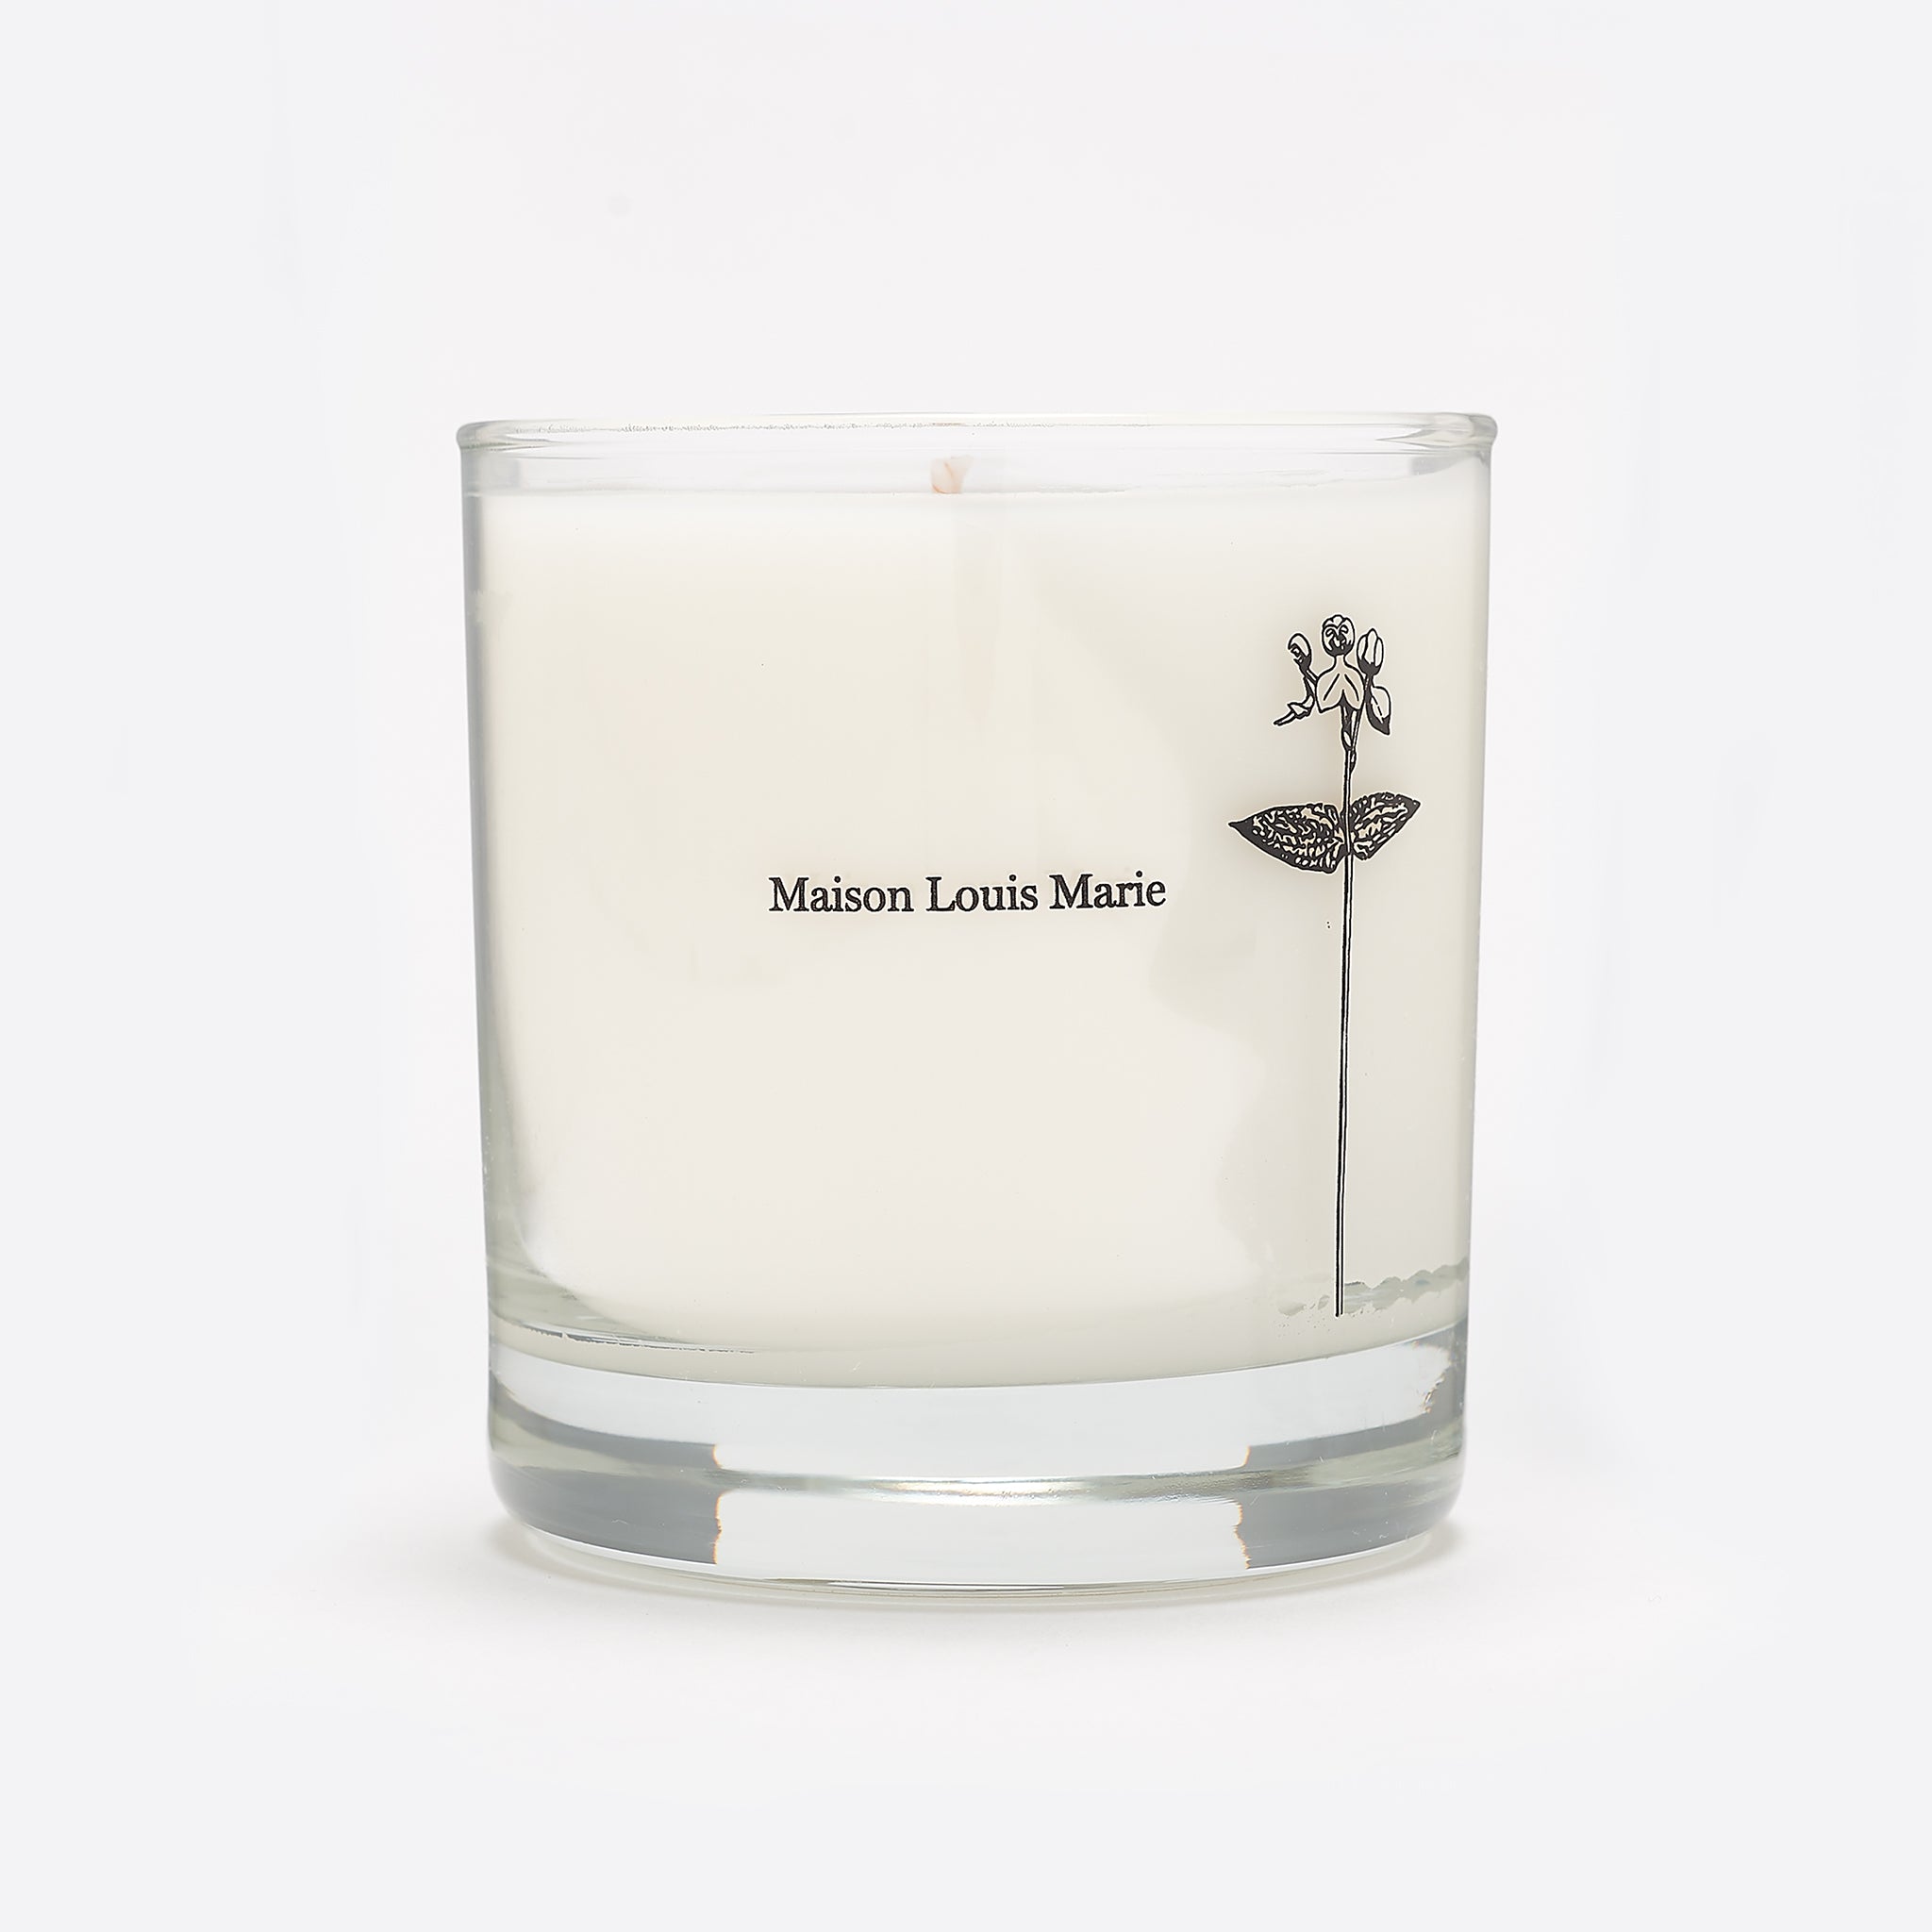 Maison Louis Marie Candle in Antidris Cassis — Our Daily Edit